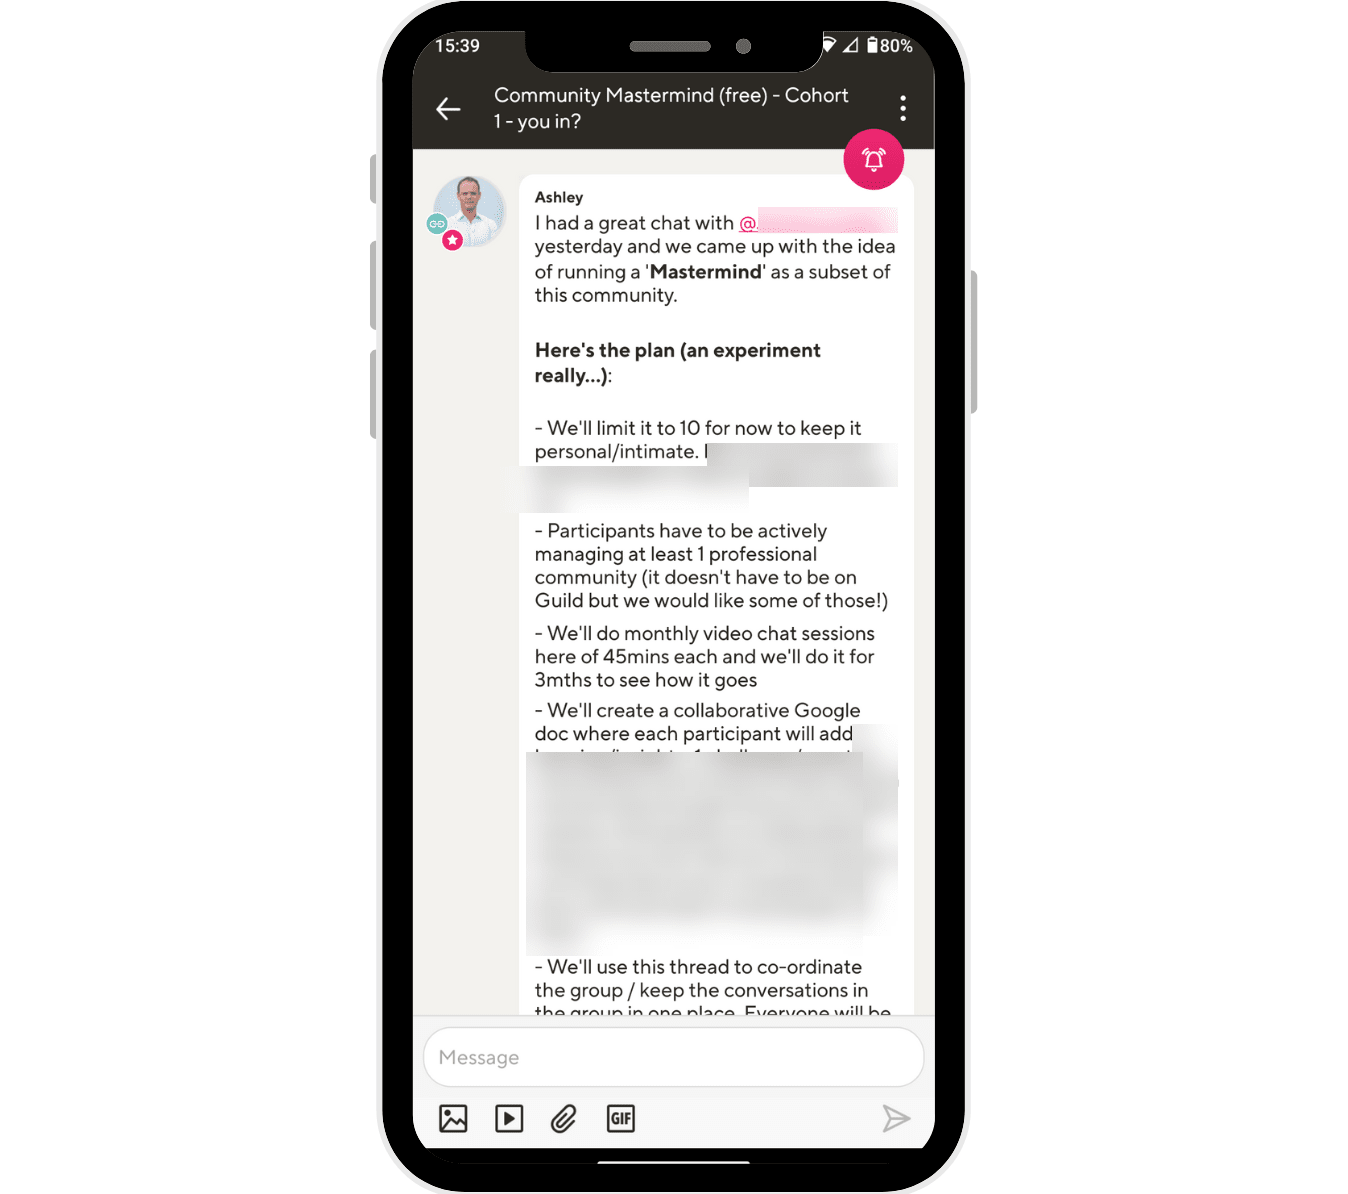 A mobile phone screen showing the Guild platform with a conversation on "Community Mastermind"